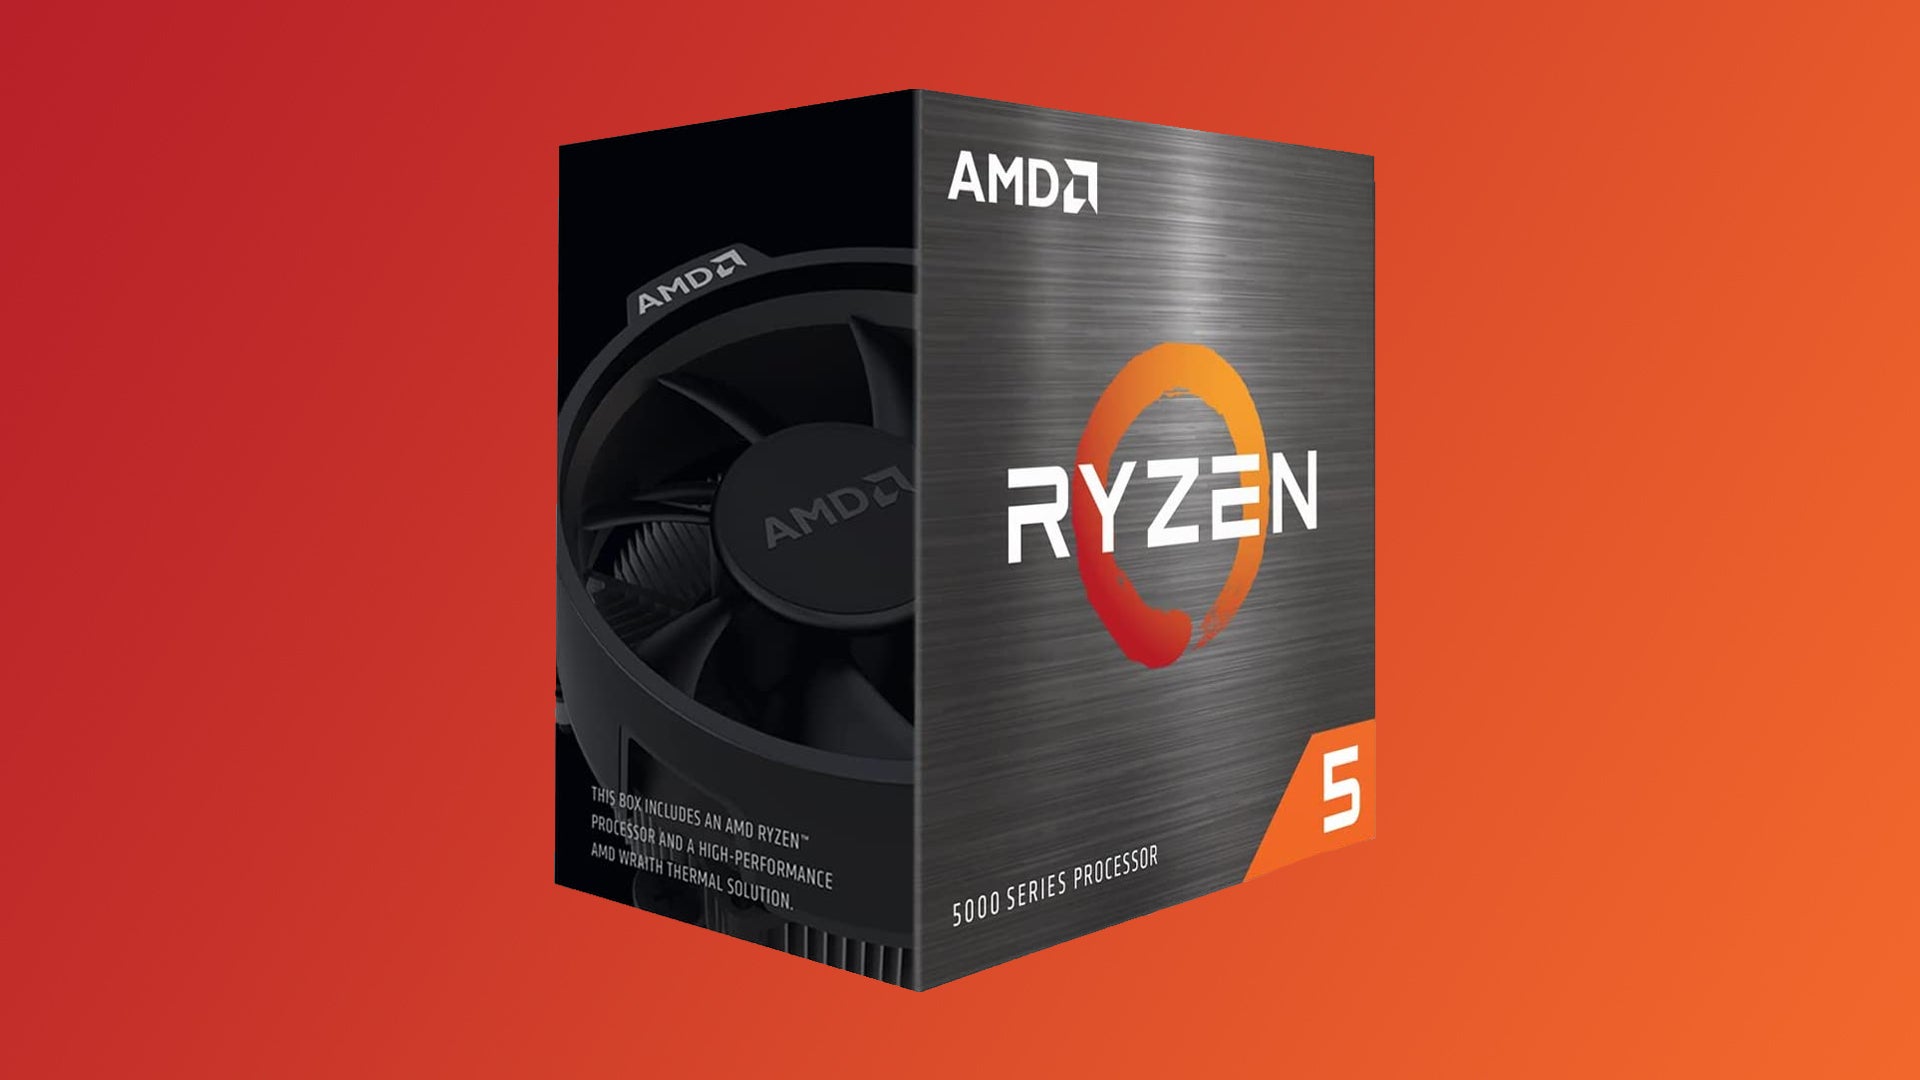 This AMD Ryzen 5 5600G with a free cooler is down to £105 with an